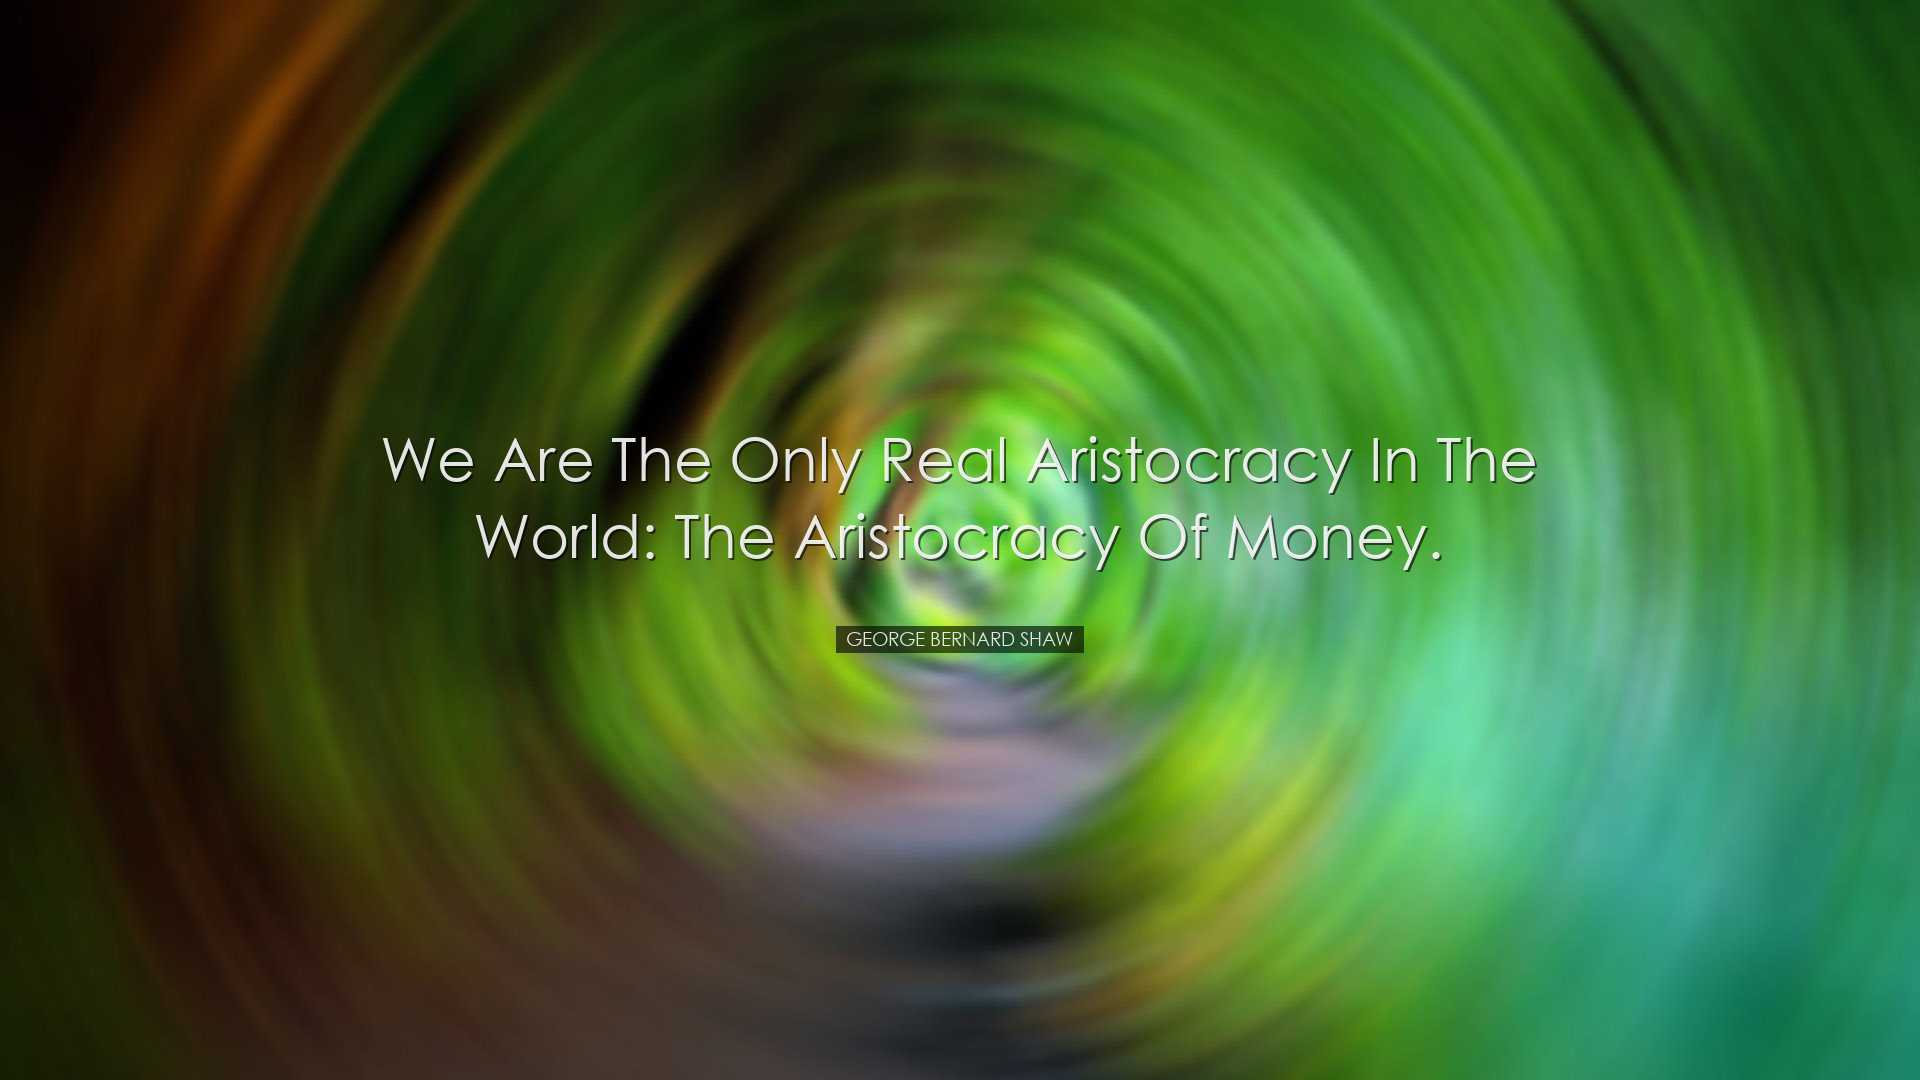 We are the only real aristocracy in the world: the aristocracy of